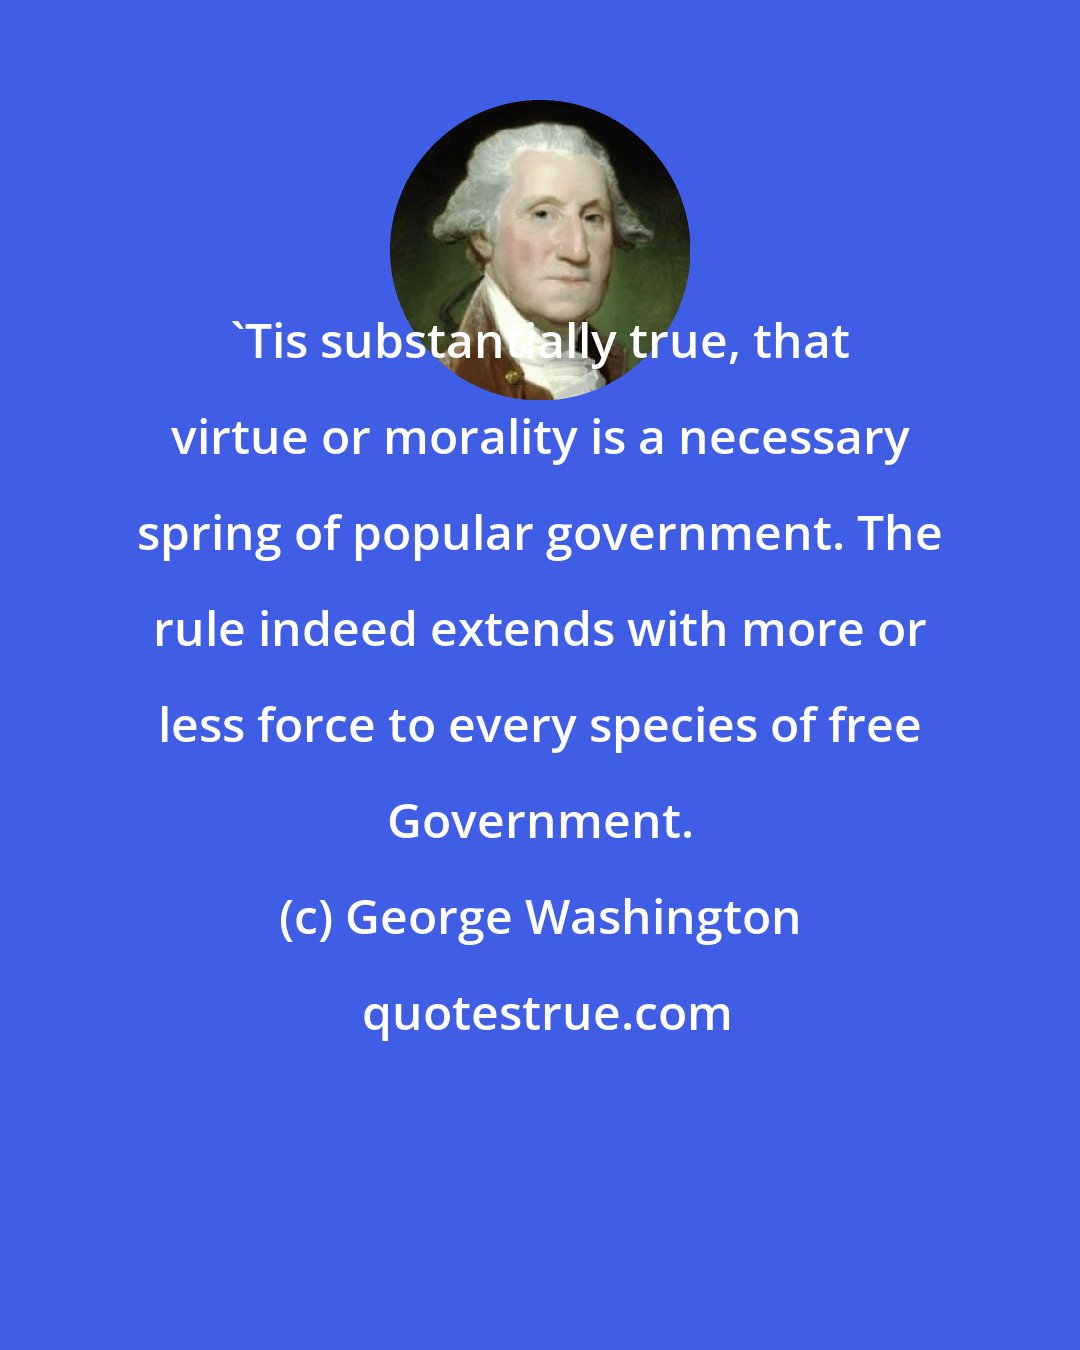 George Washington: `Tis substantially true, that virtue or morality is a necessary spring of popular government. The rule indeed extends with more or less force to every species of free Government.